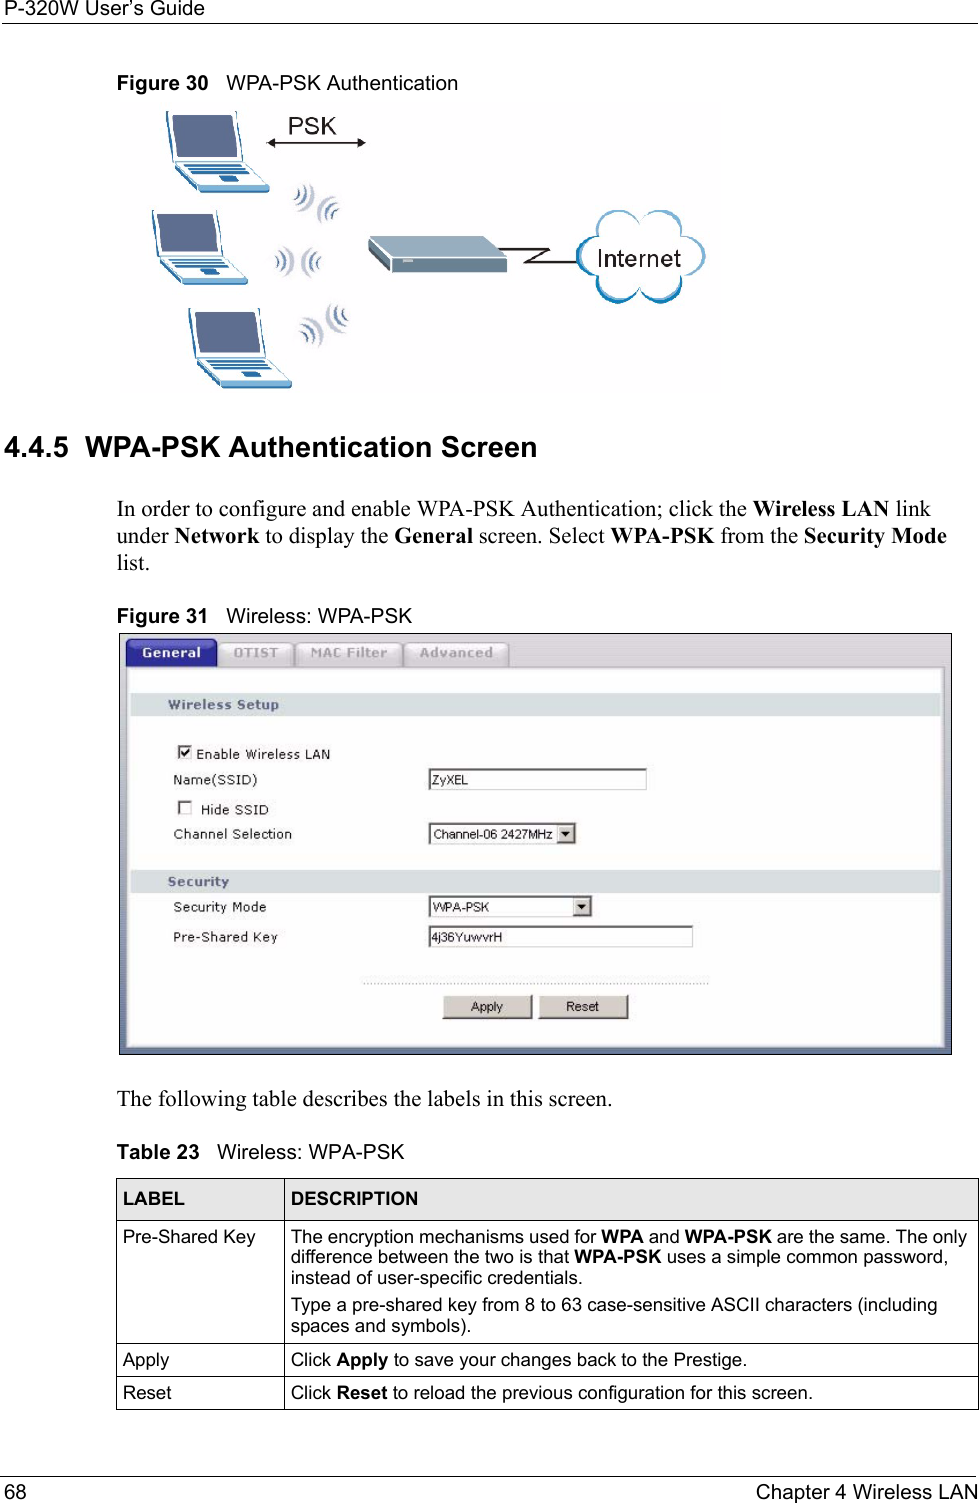 P-320W User’s Guide68  Chapter 4 Wireless LANFigure 30   WPA-PSK Authentication4.4.5  WPA-PSK Authentication ScreenIn order to configure and enable WPA-PSK Authentication; click the Wireless LAN link under Network to display the General screen. Select WPA-PSK from the Security Mode list.Figure 31   Wireless: WPA-PSKThe following table describes the labels in this screen.Table 23   Wireless: WPA-PSKLABEL DESCRIPTIONPre-Shared Key  The encryption mechanisms used for WPA and WPA-PSK are the same. The only difference between the two is that WPA-PSK uses a simple common password, instead of user-specific credentials.Type a pre-shared key from 8 to 63 case-sensitive ASCII characters (including spaces and symbols).Apply Click Apply to save your changes back to the Prestige.Reset Click Reset to reload the previous configuration for this screen.